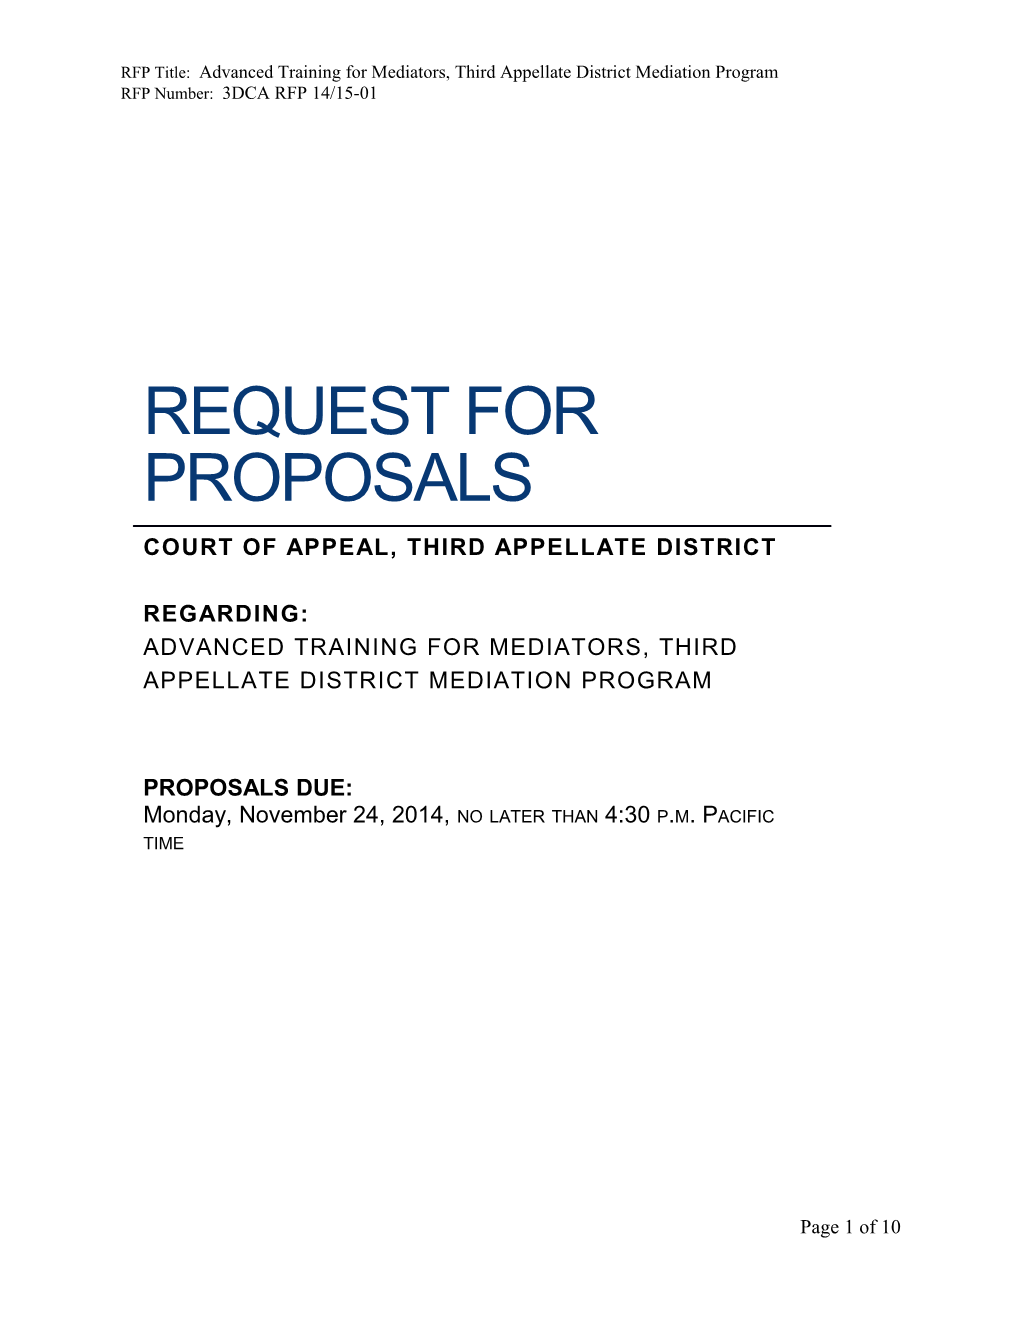 RFP Title: Advanced Training for Mediators, Third Appellate District Mediation Program